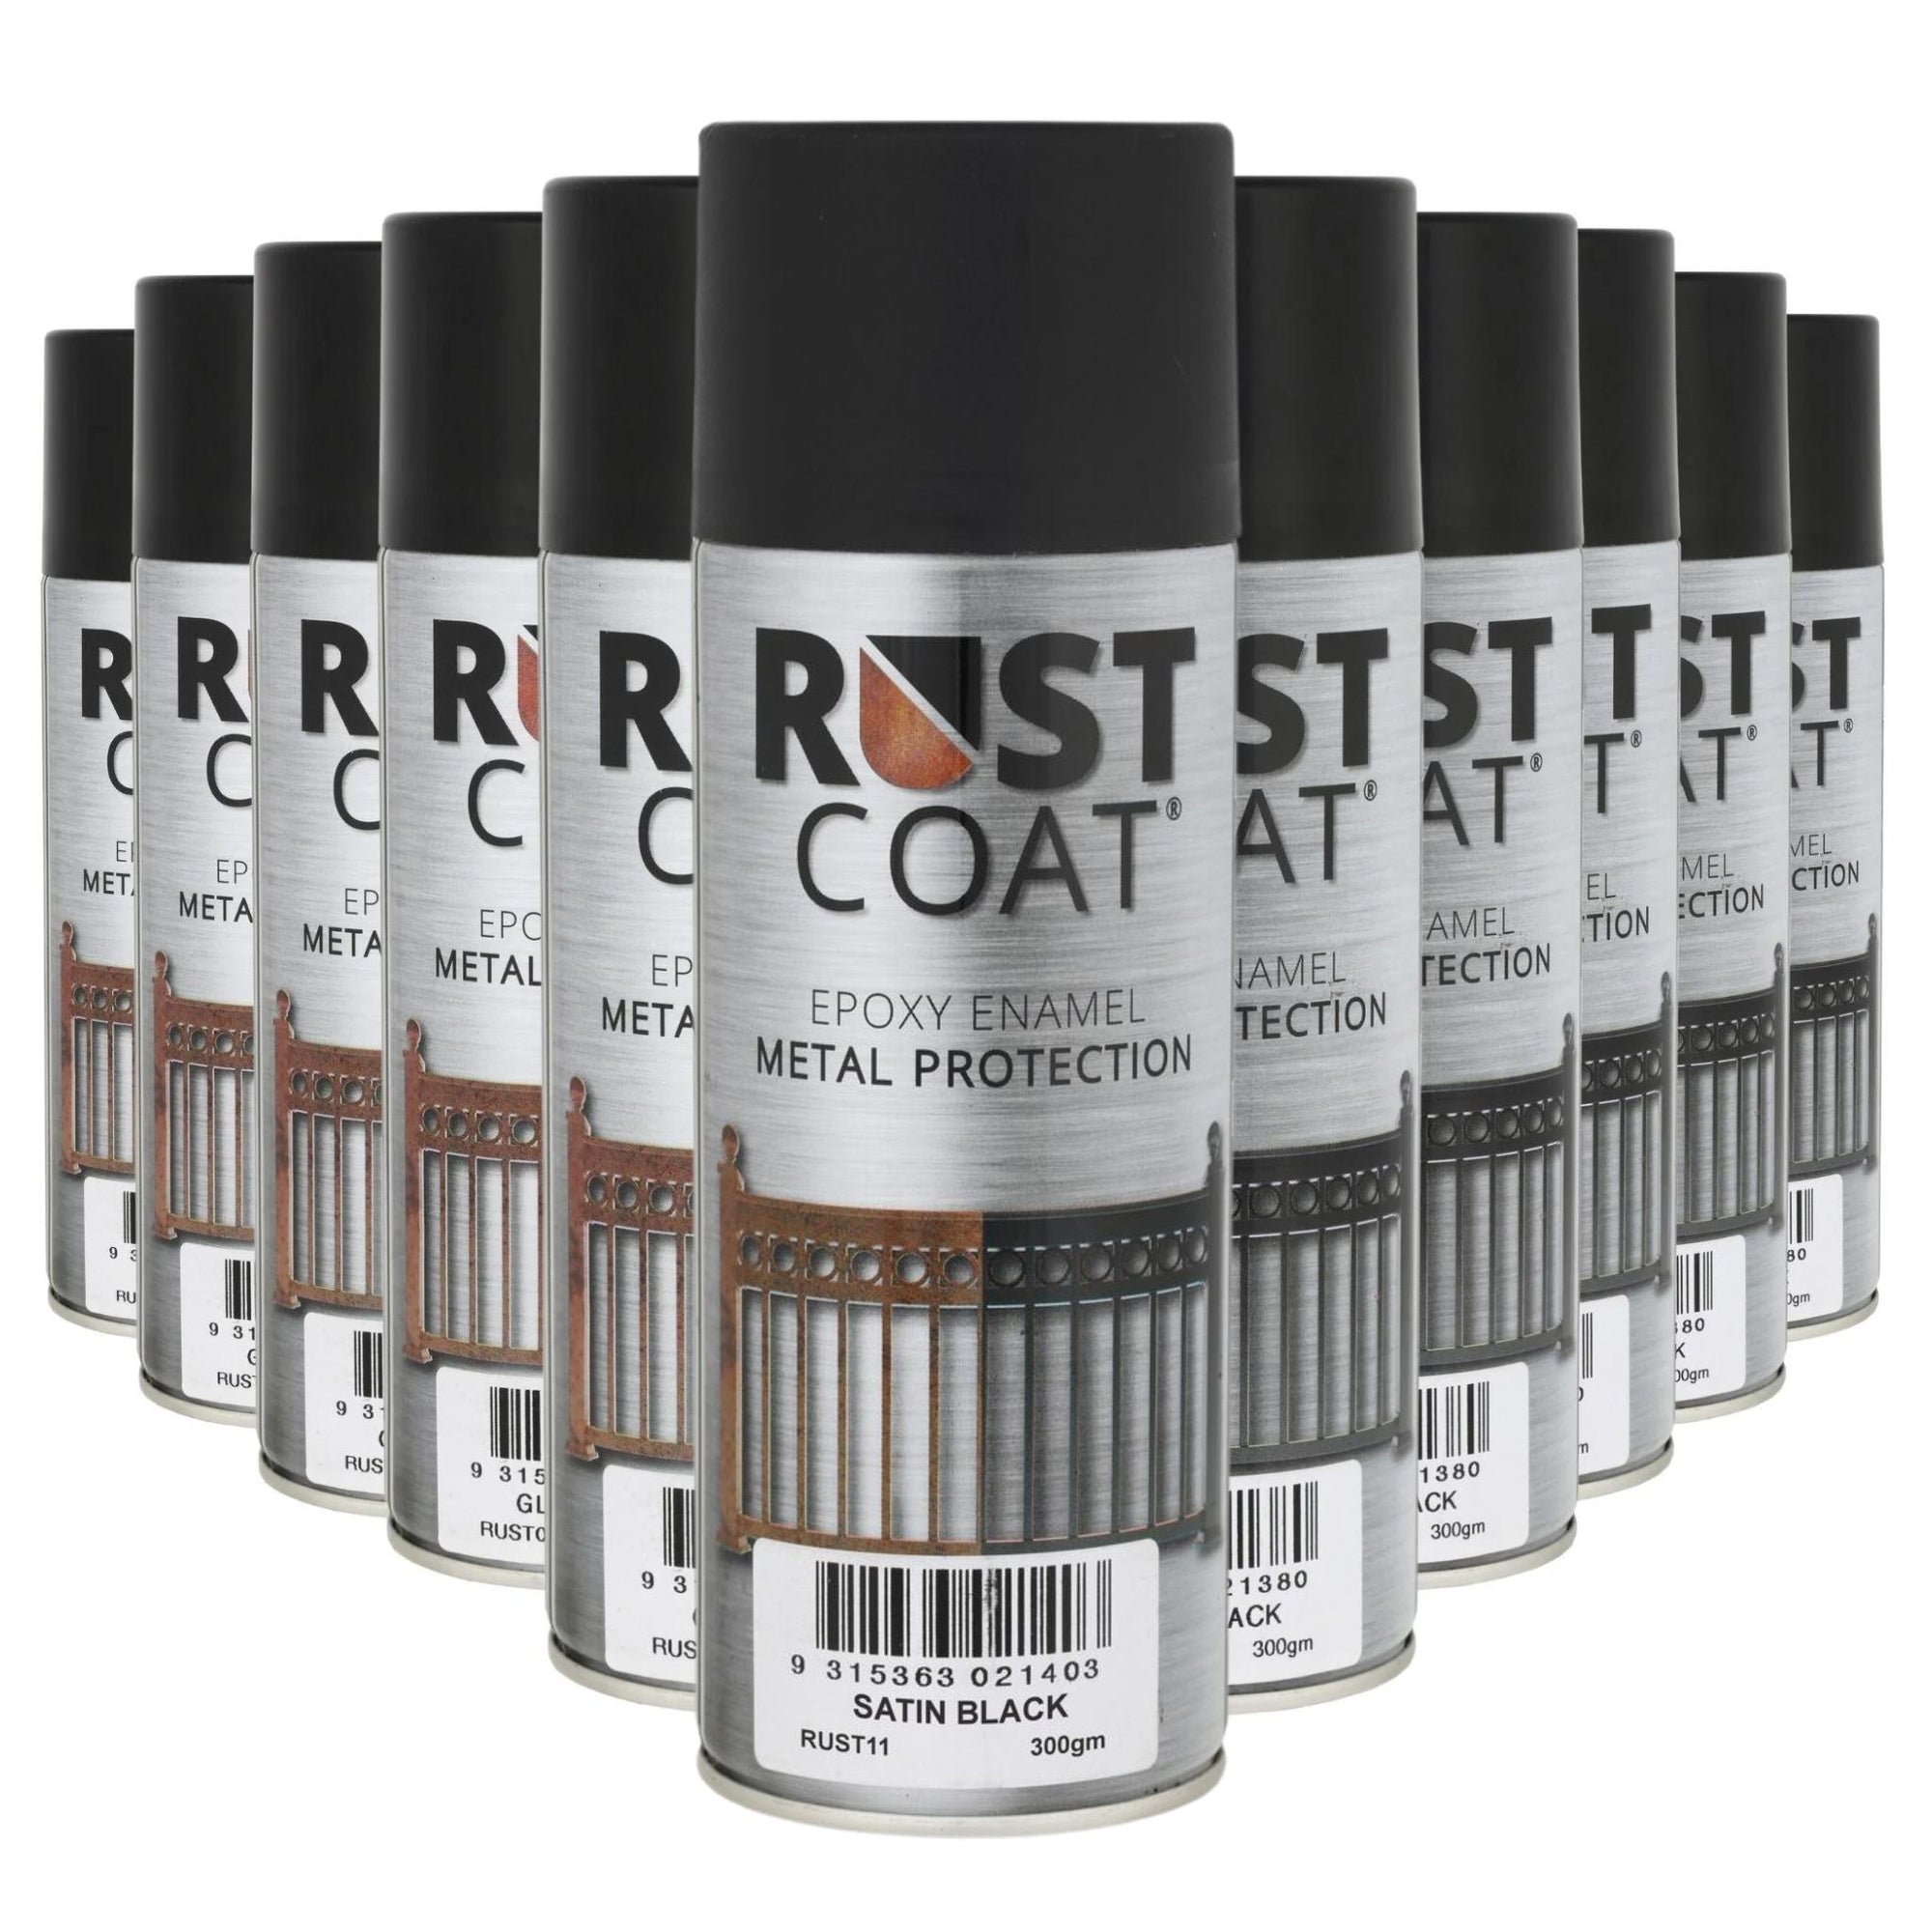 12 CANS | Balchan Satin Black Rust Coat 300g - RUST11 - South East Clearance Centre